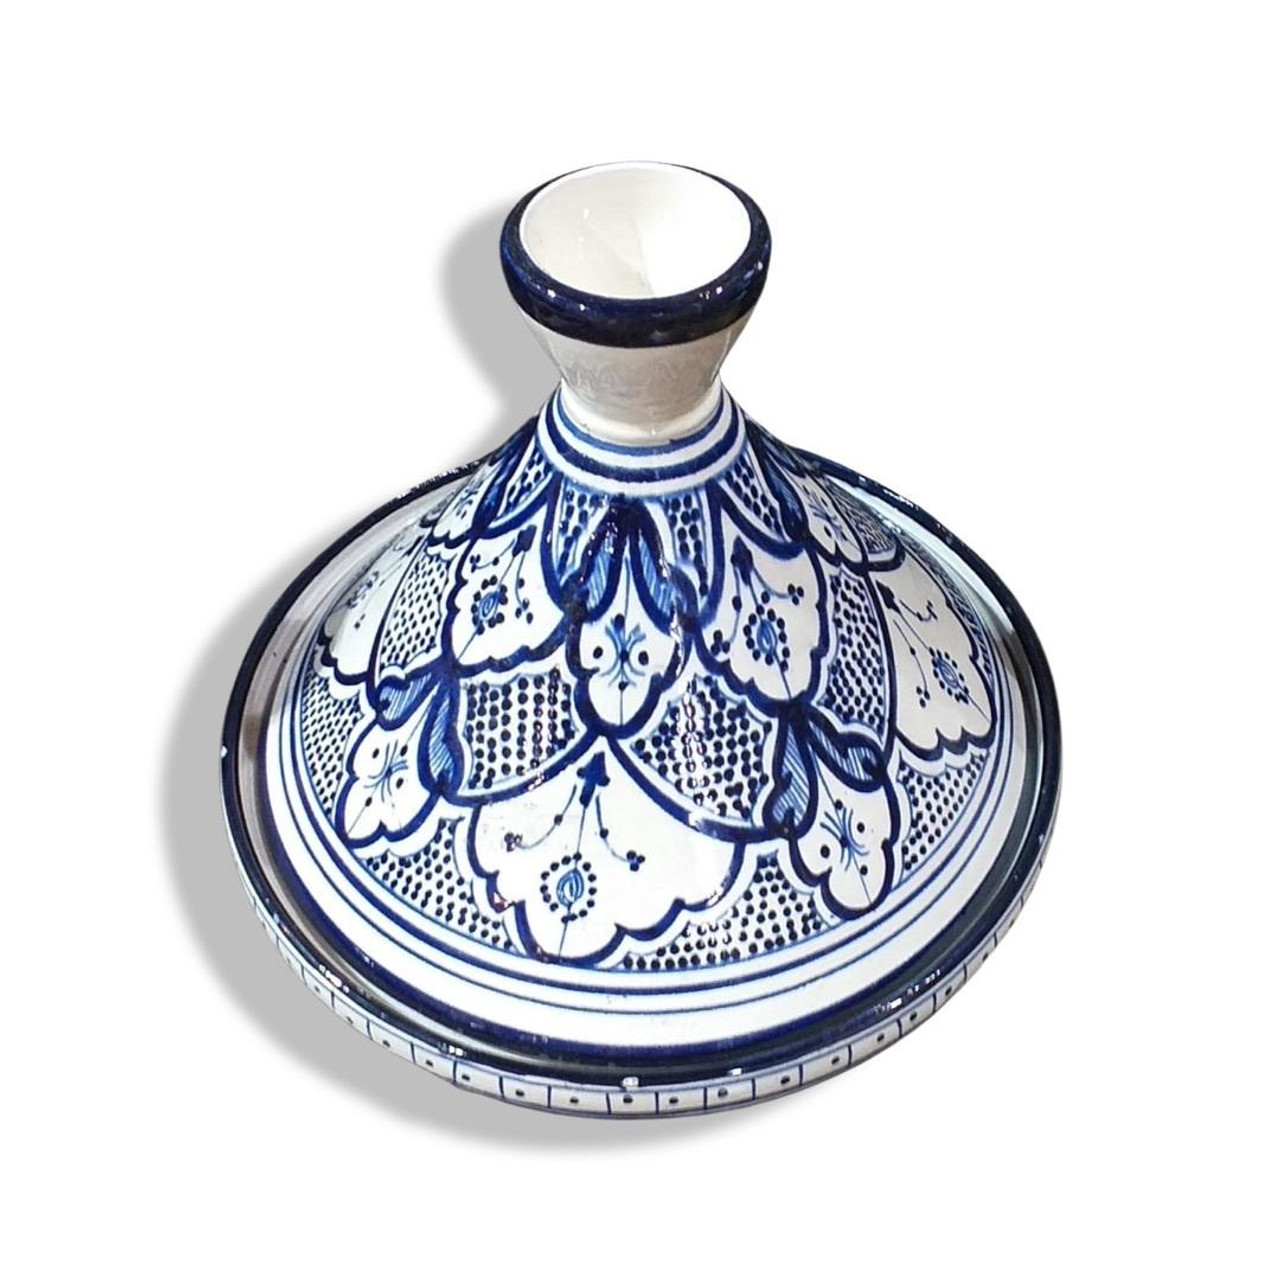 Ceramic Moroccan tagine , hand-painted tagine new home gift